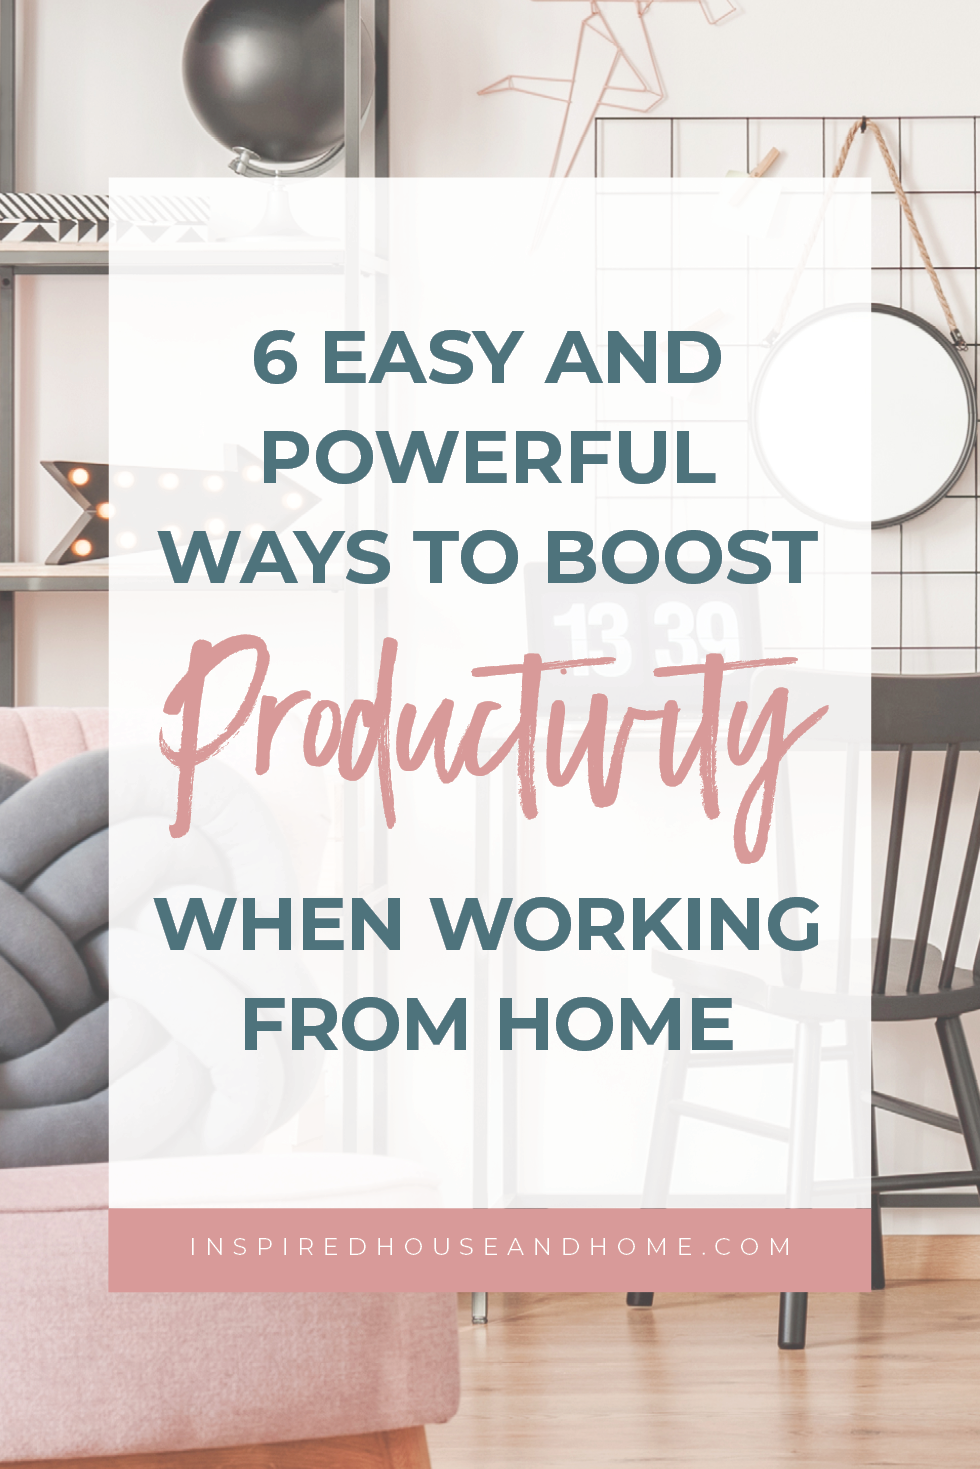 6 Easy and Powerful Ways To Boost Productivity When Working From Home | Inspired House and Home